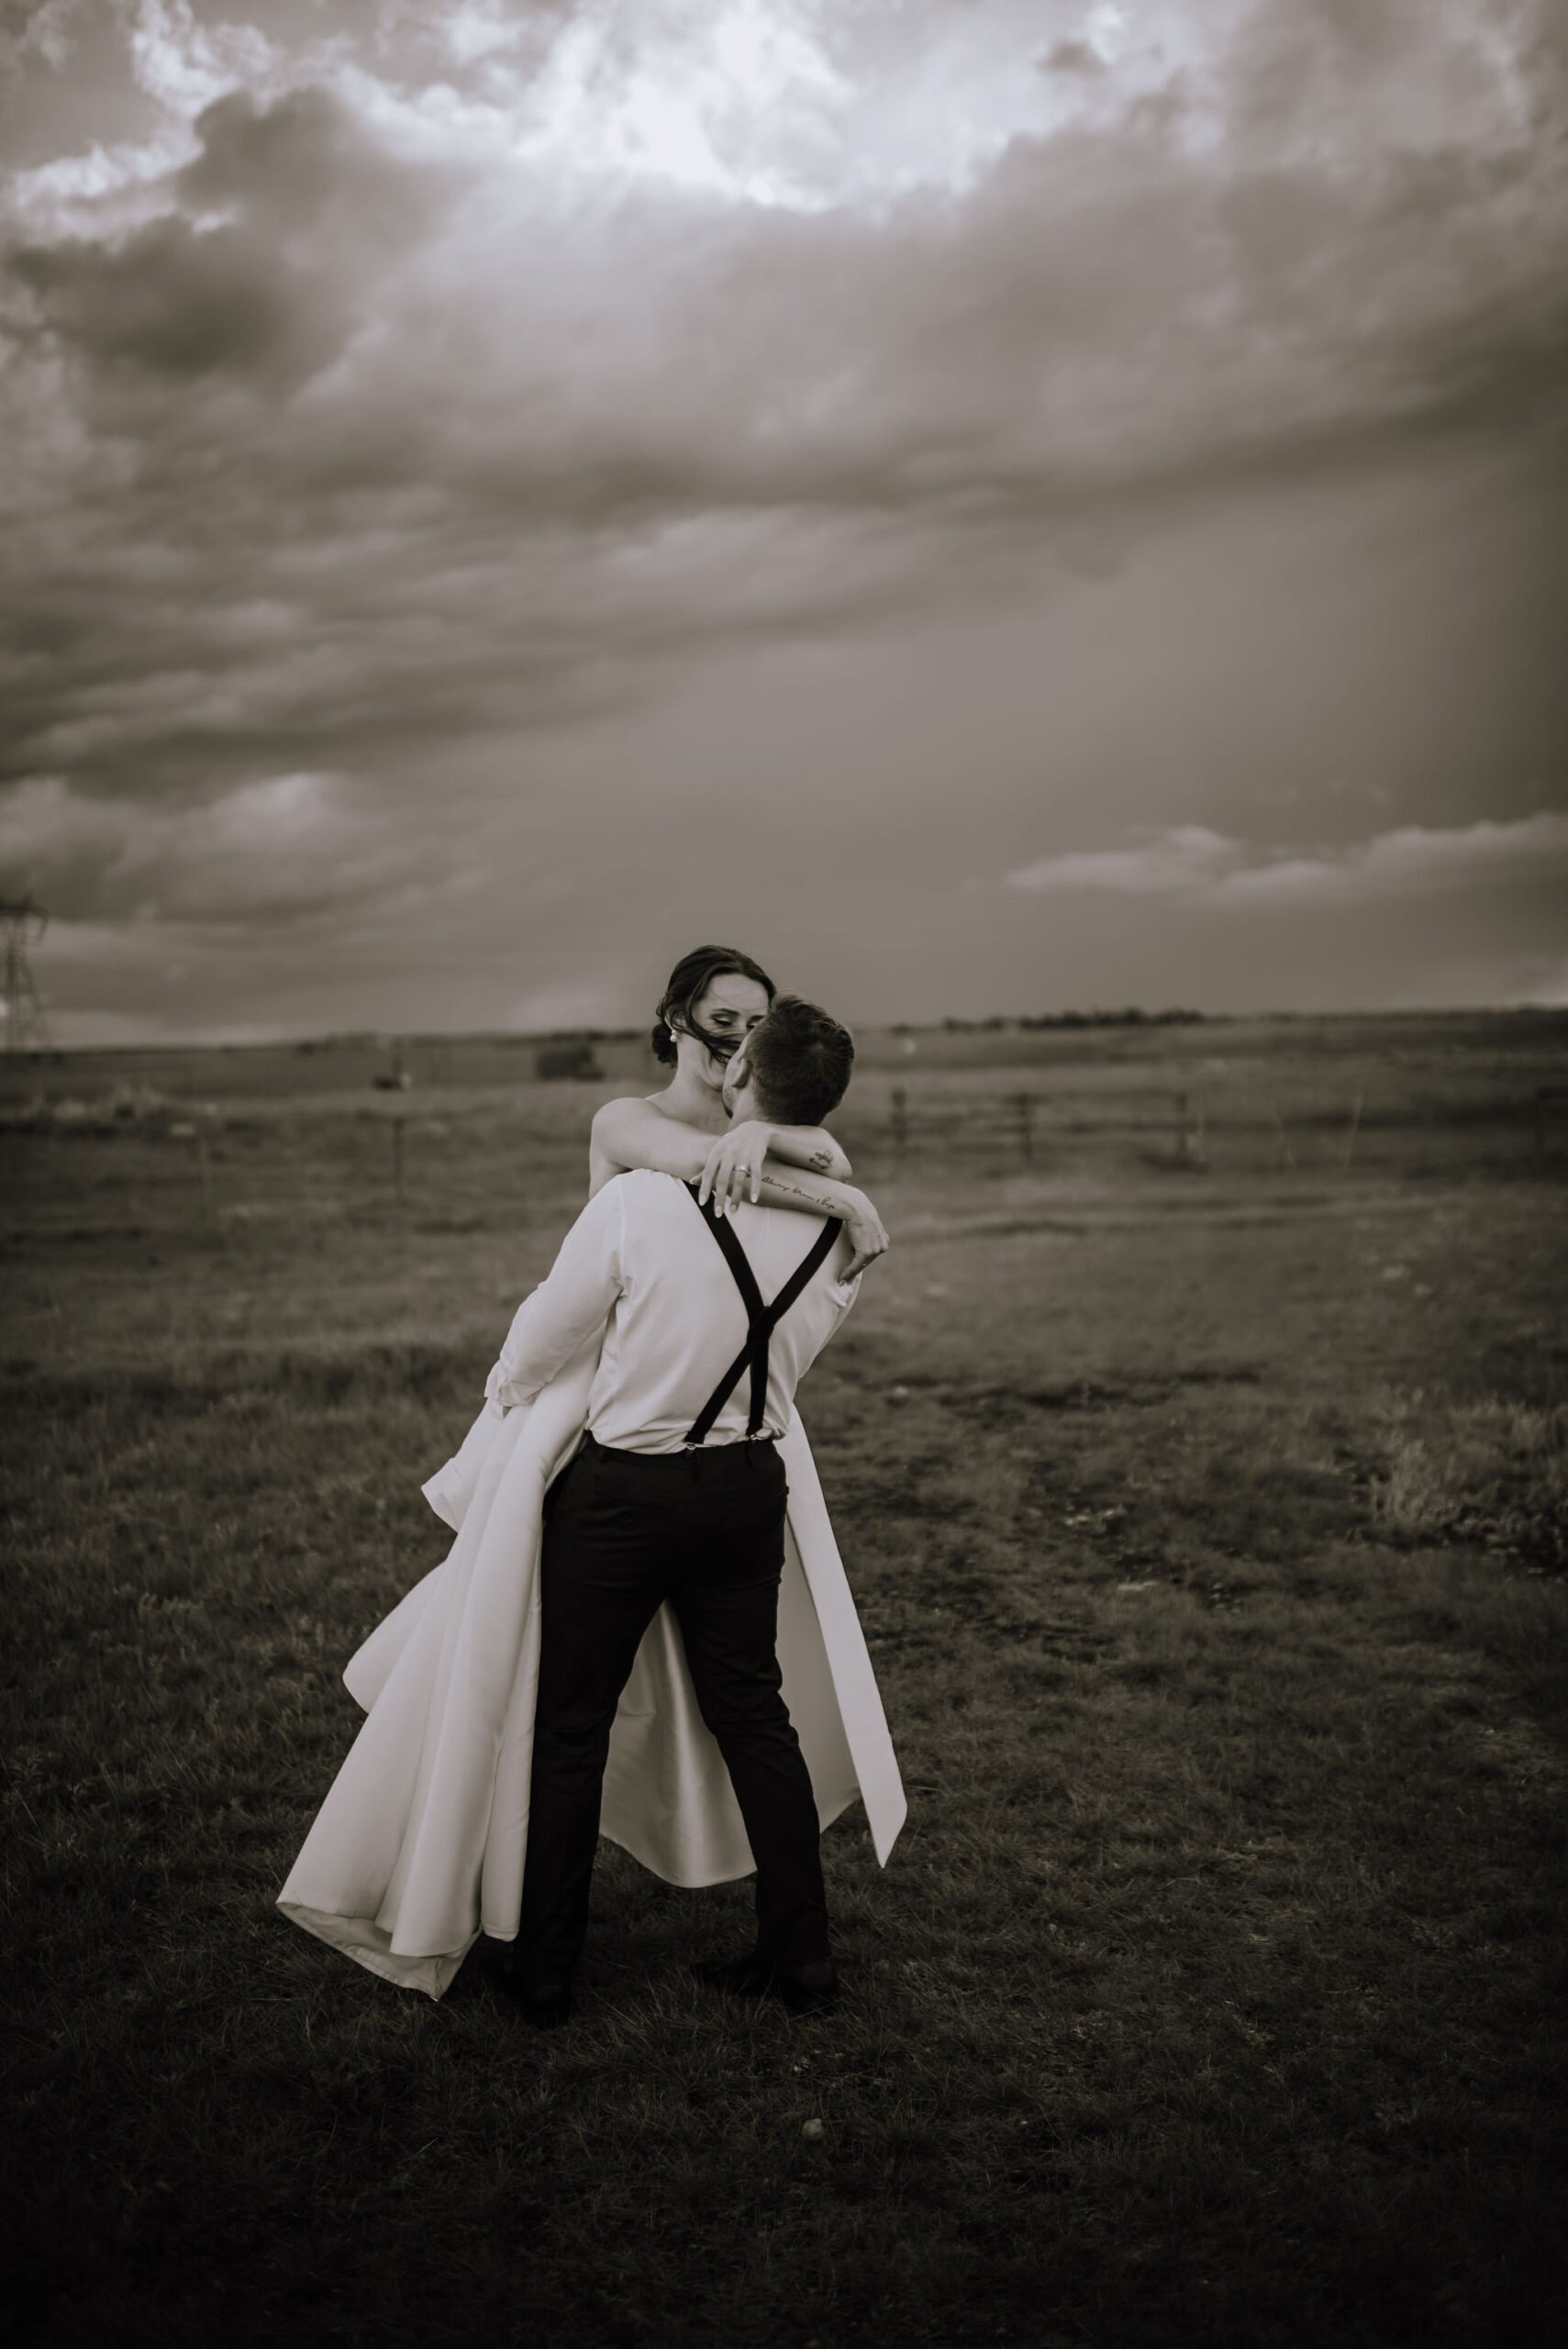 A bride and groom passionately hugging in a field under a stormy sky, symbolizing their eternal June love.